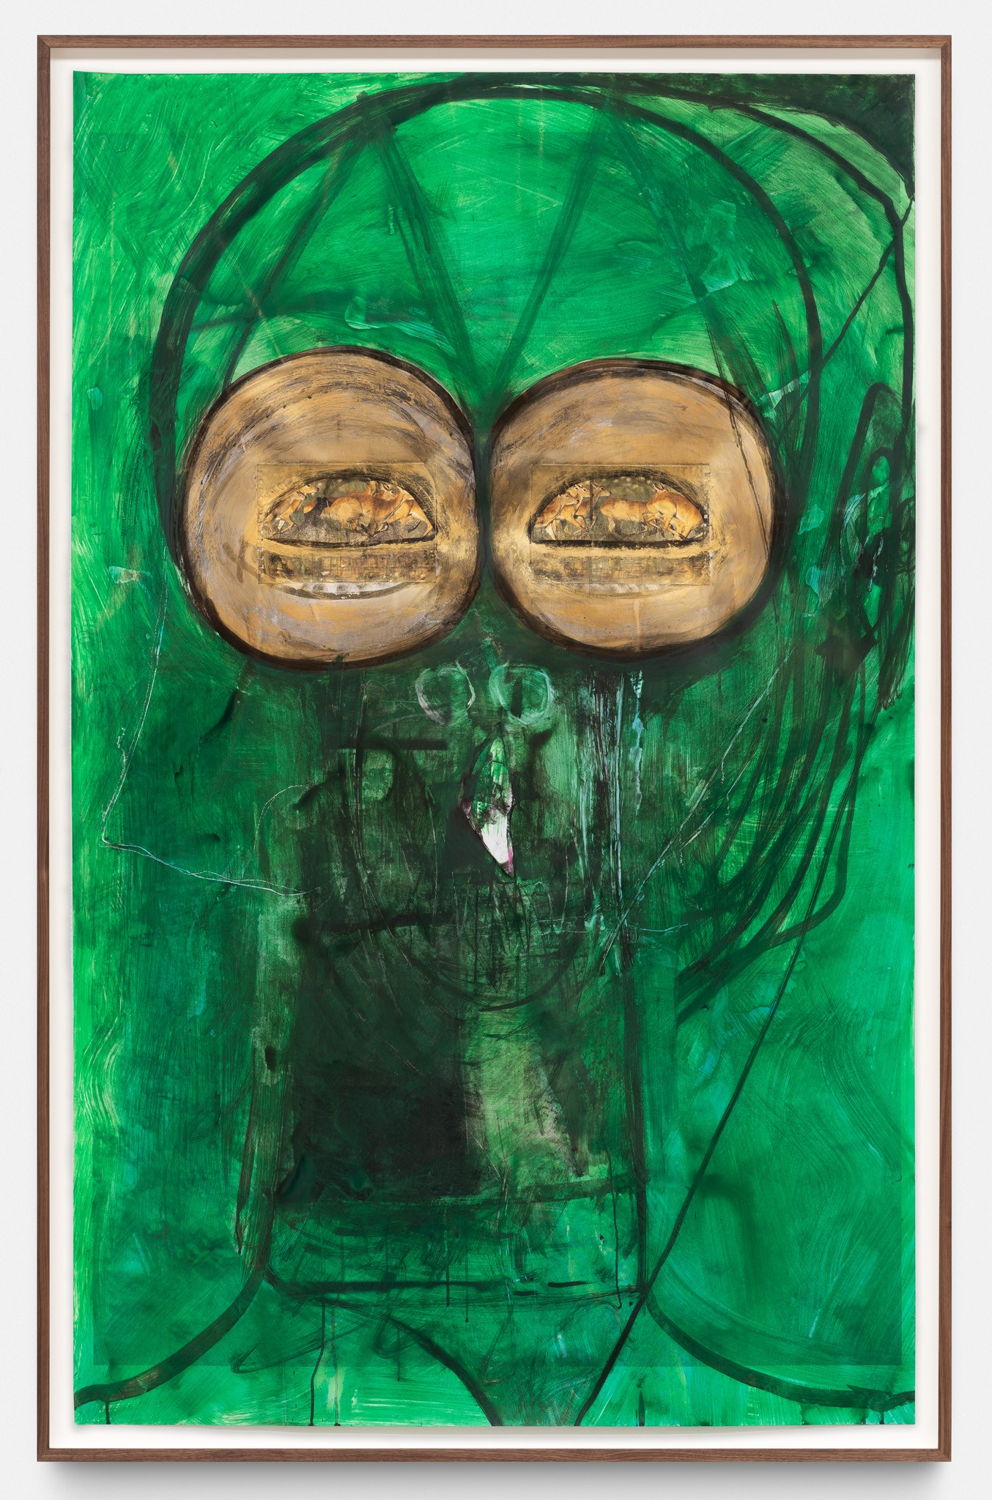 Untitled, Huma Bhabha, 2022, private collection. Courtesy of the artist & Xavier Hufkens, Brussels, photo: HV-studio